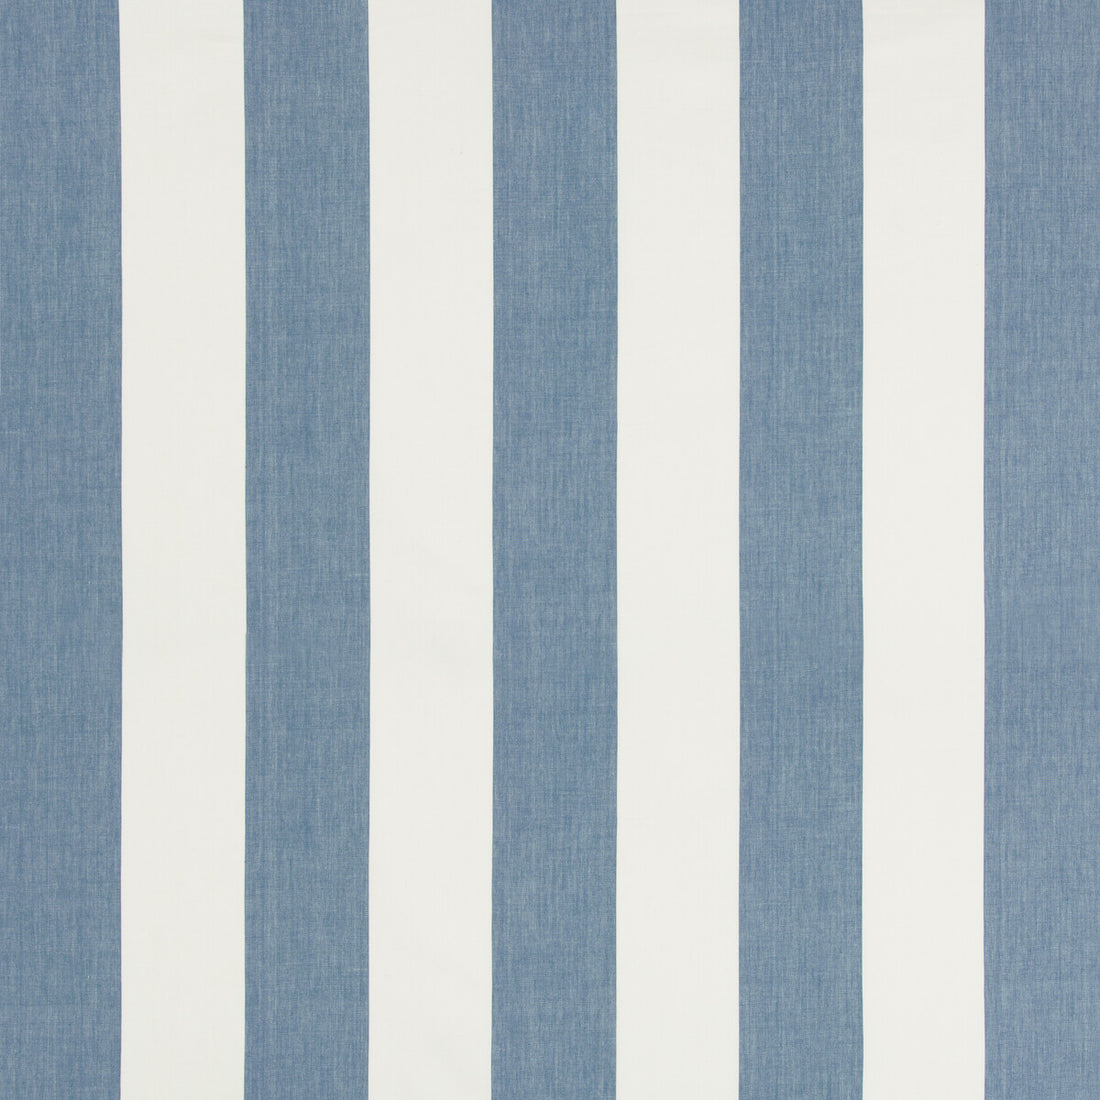 St Croix Stripe fabric in marine color - pattern 2018145.15.0 - by Lee Jofa in the Suzanne Kasler The Riviera collection